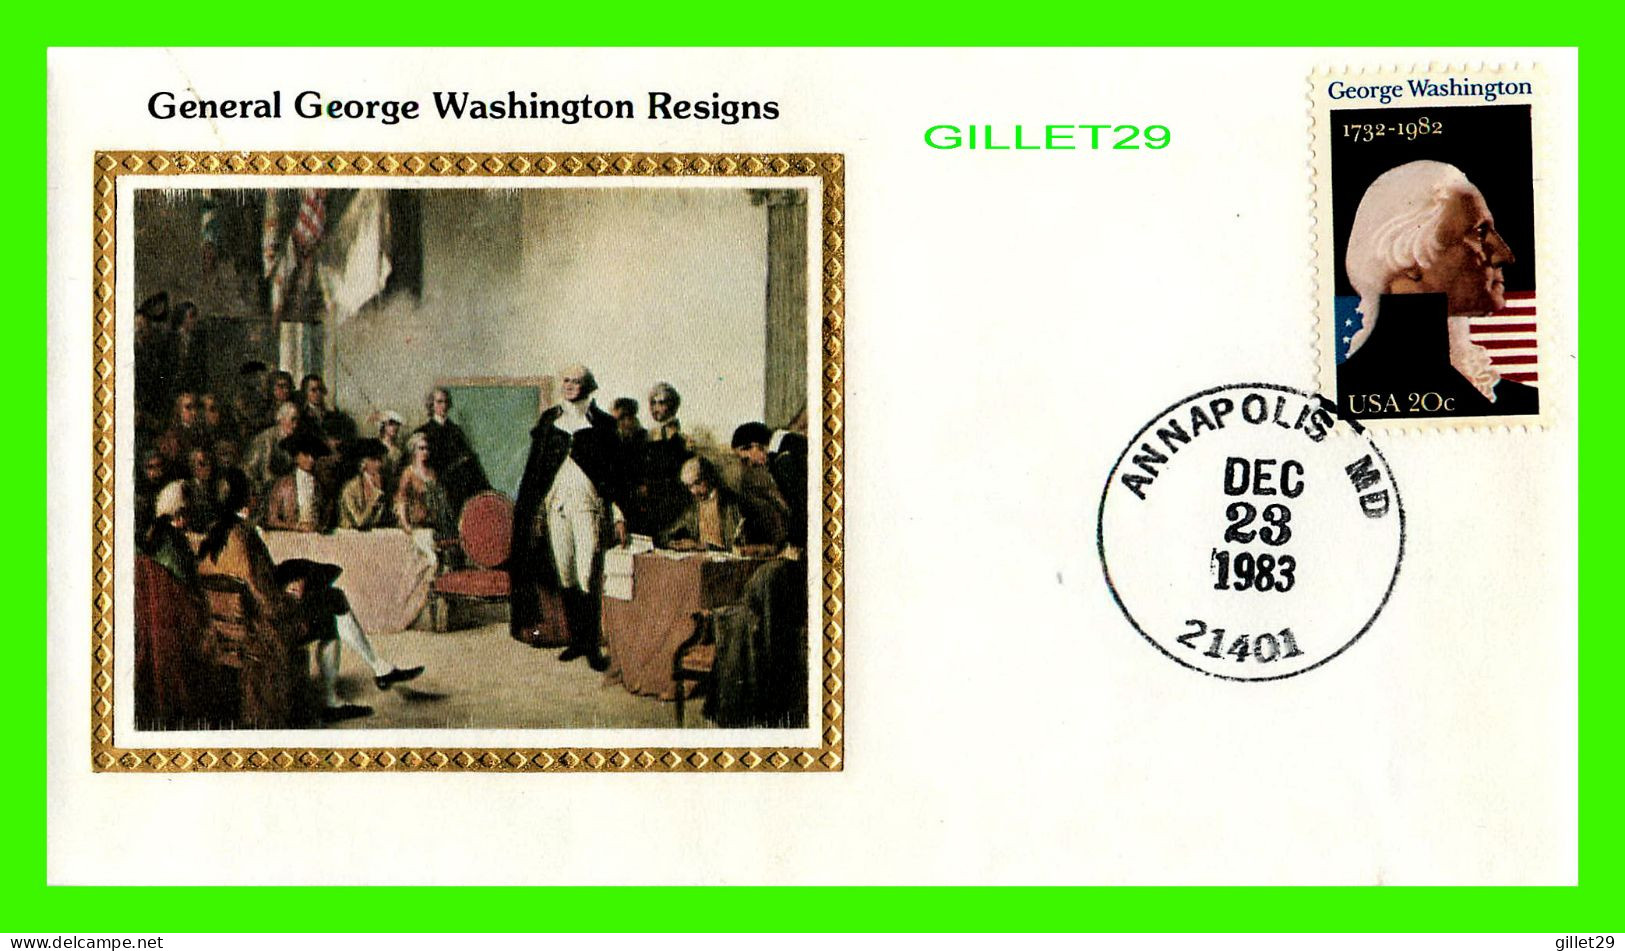 SILK COVERS - PREMIER JOUR 1983 - GENERAL GEORGE WASHINGTON RESIGNS - 1732-1982, U.S.A. - - Covers & Documents